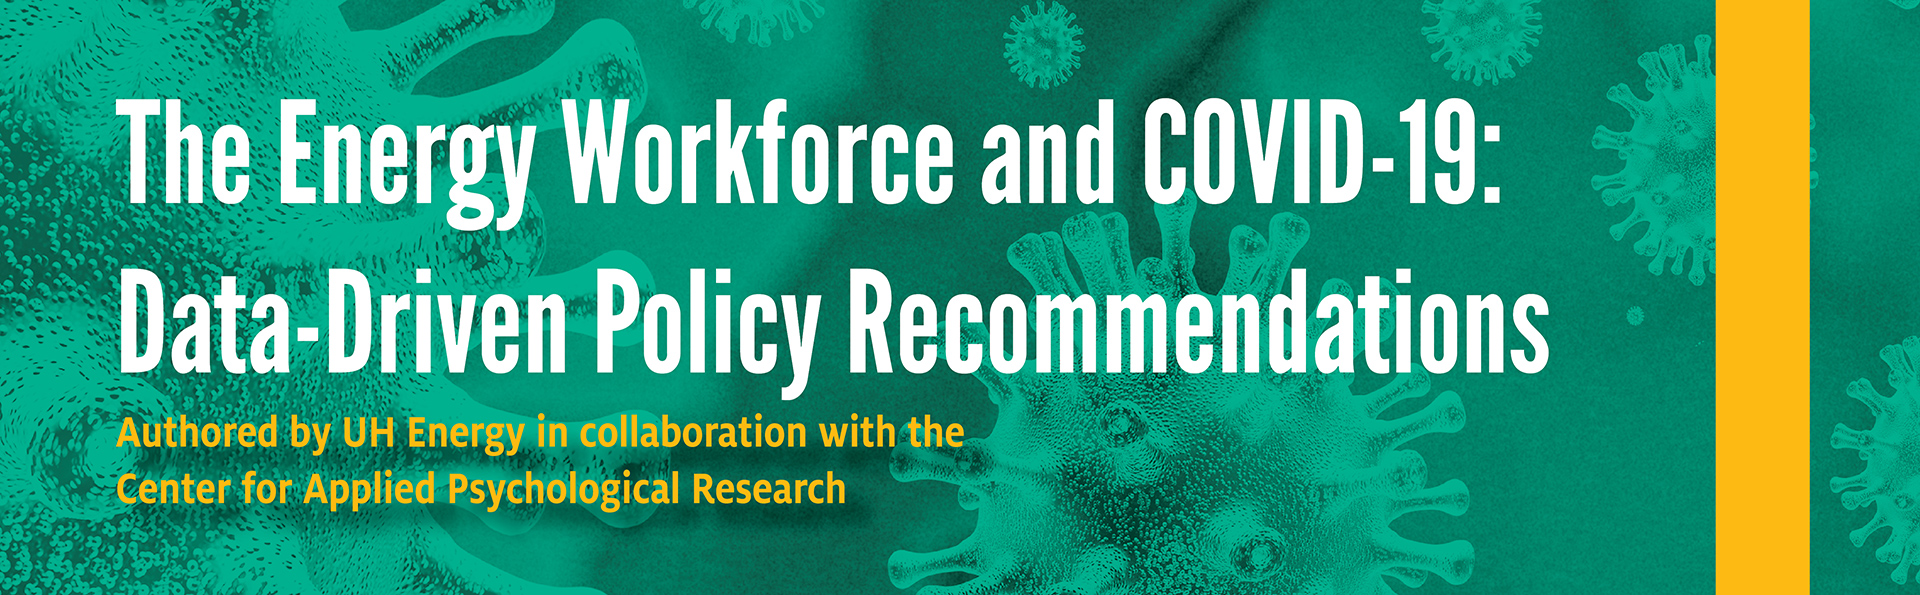 The Energy Workforce And COVID-19: Data-Driven Policy Recommendations